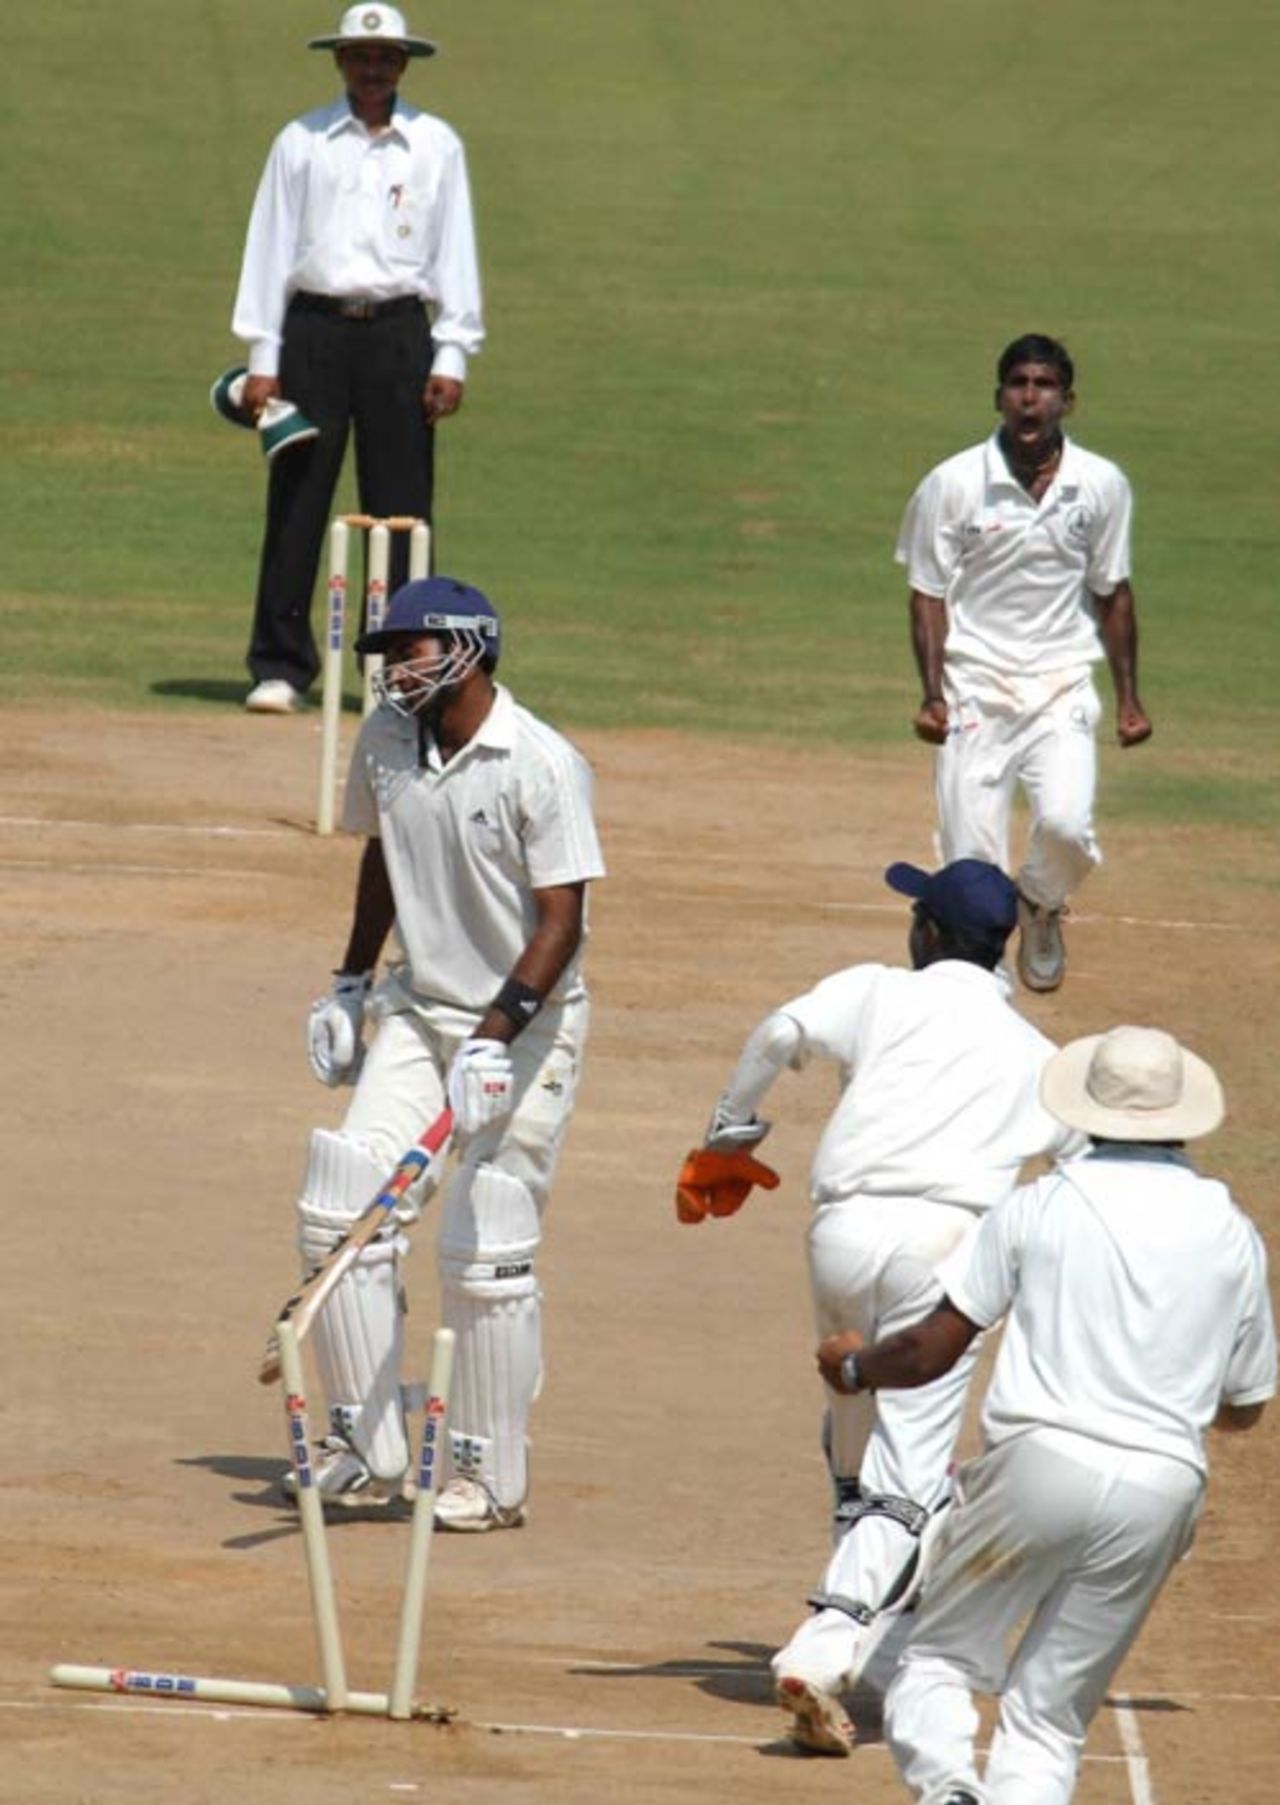 Paras Dogra is stumped by H Gopinath off the bowling of Chinnaswamy Suresh, Tamil Nadu v Himachal Pradesh, Ranji Trophy Super League, Group A, 5th round, Chennai, 2nd day, December 10, 2007 